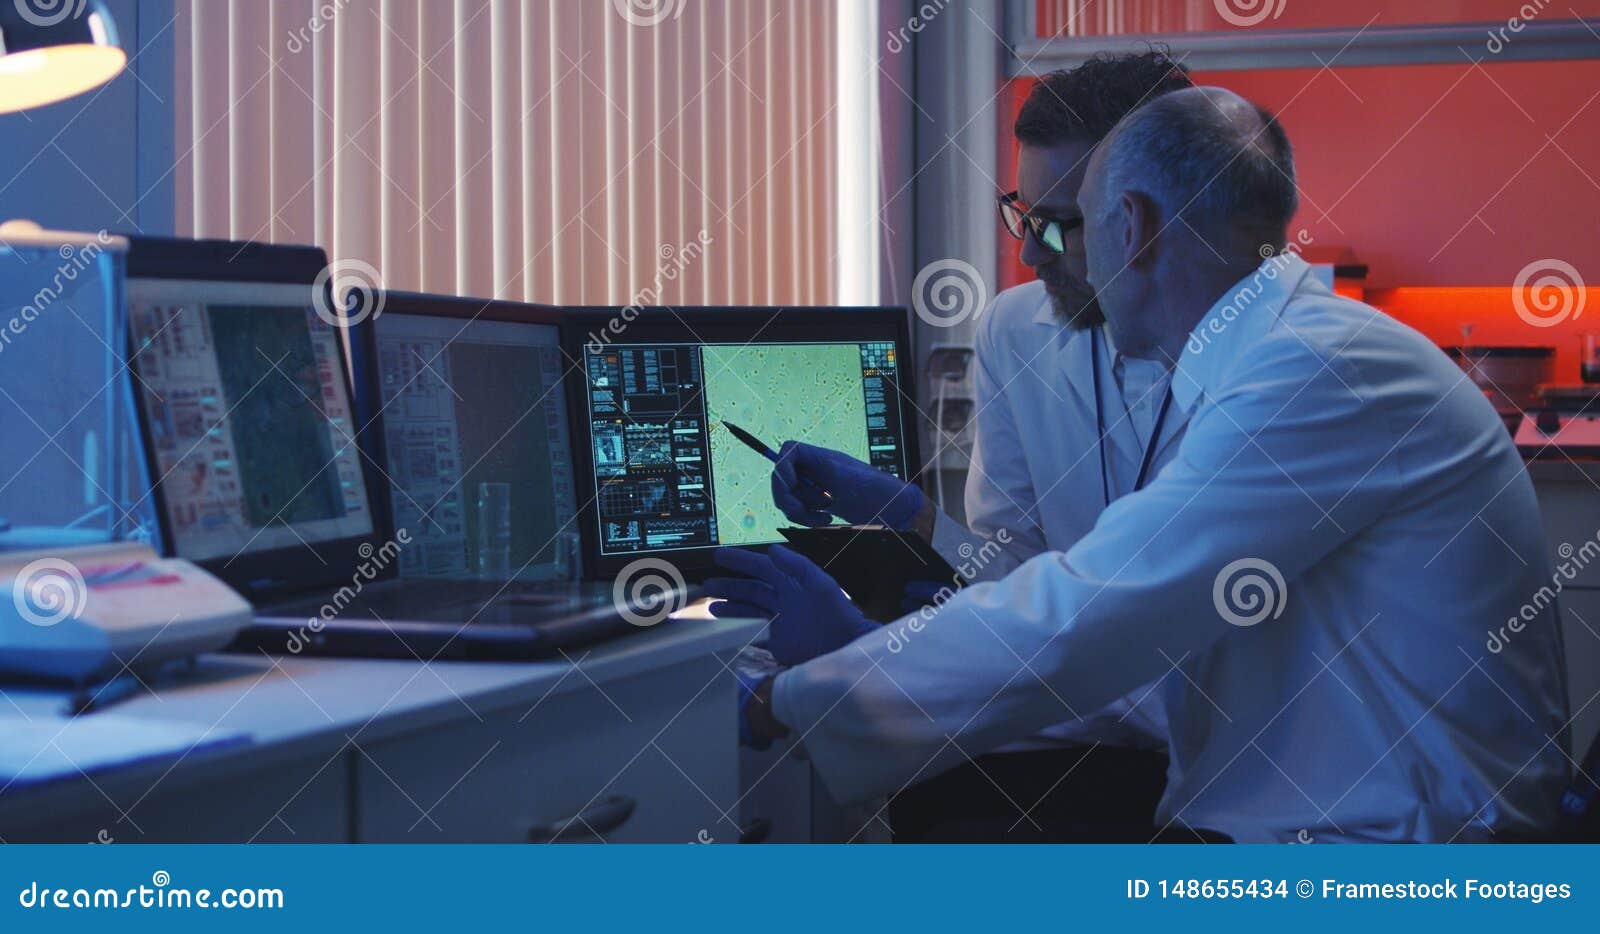 scientists watching monitor and analyzing